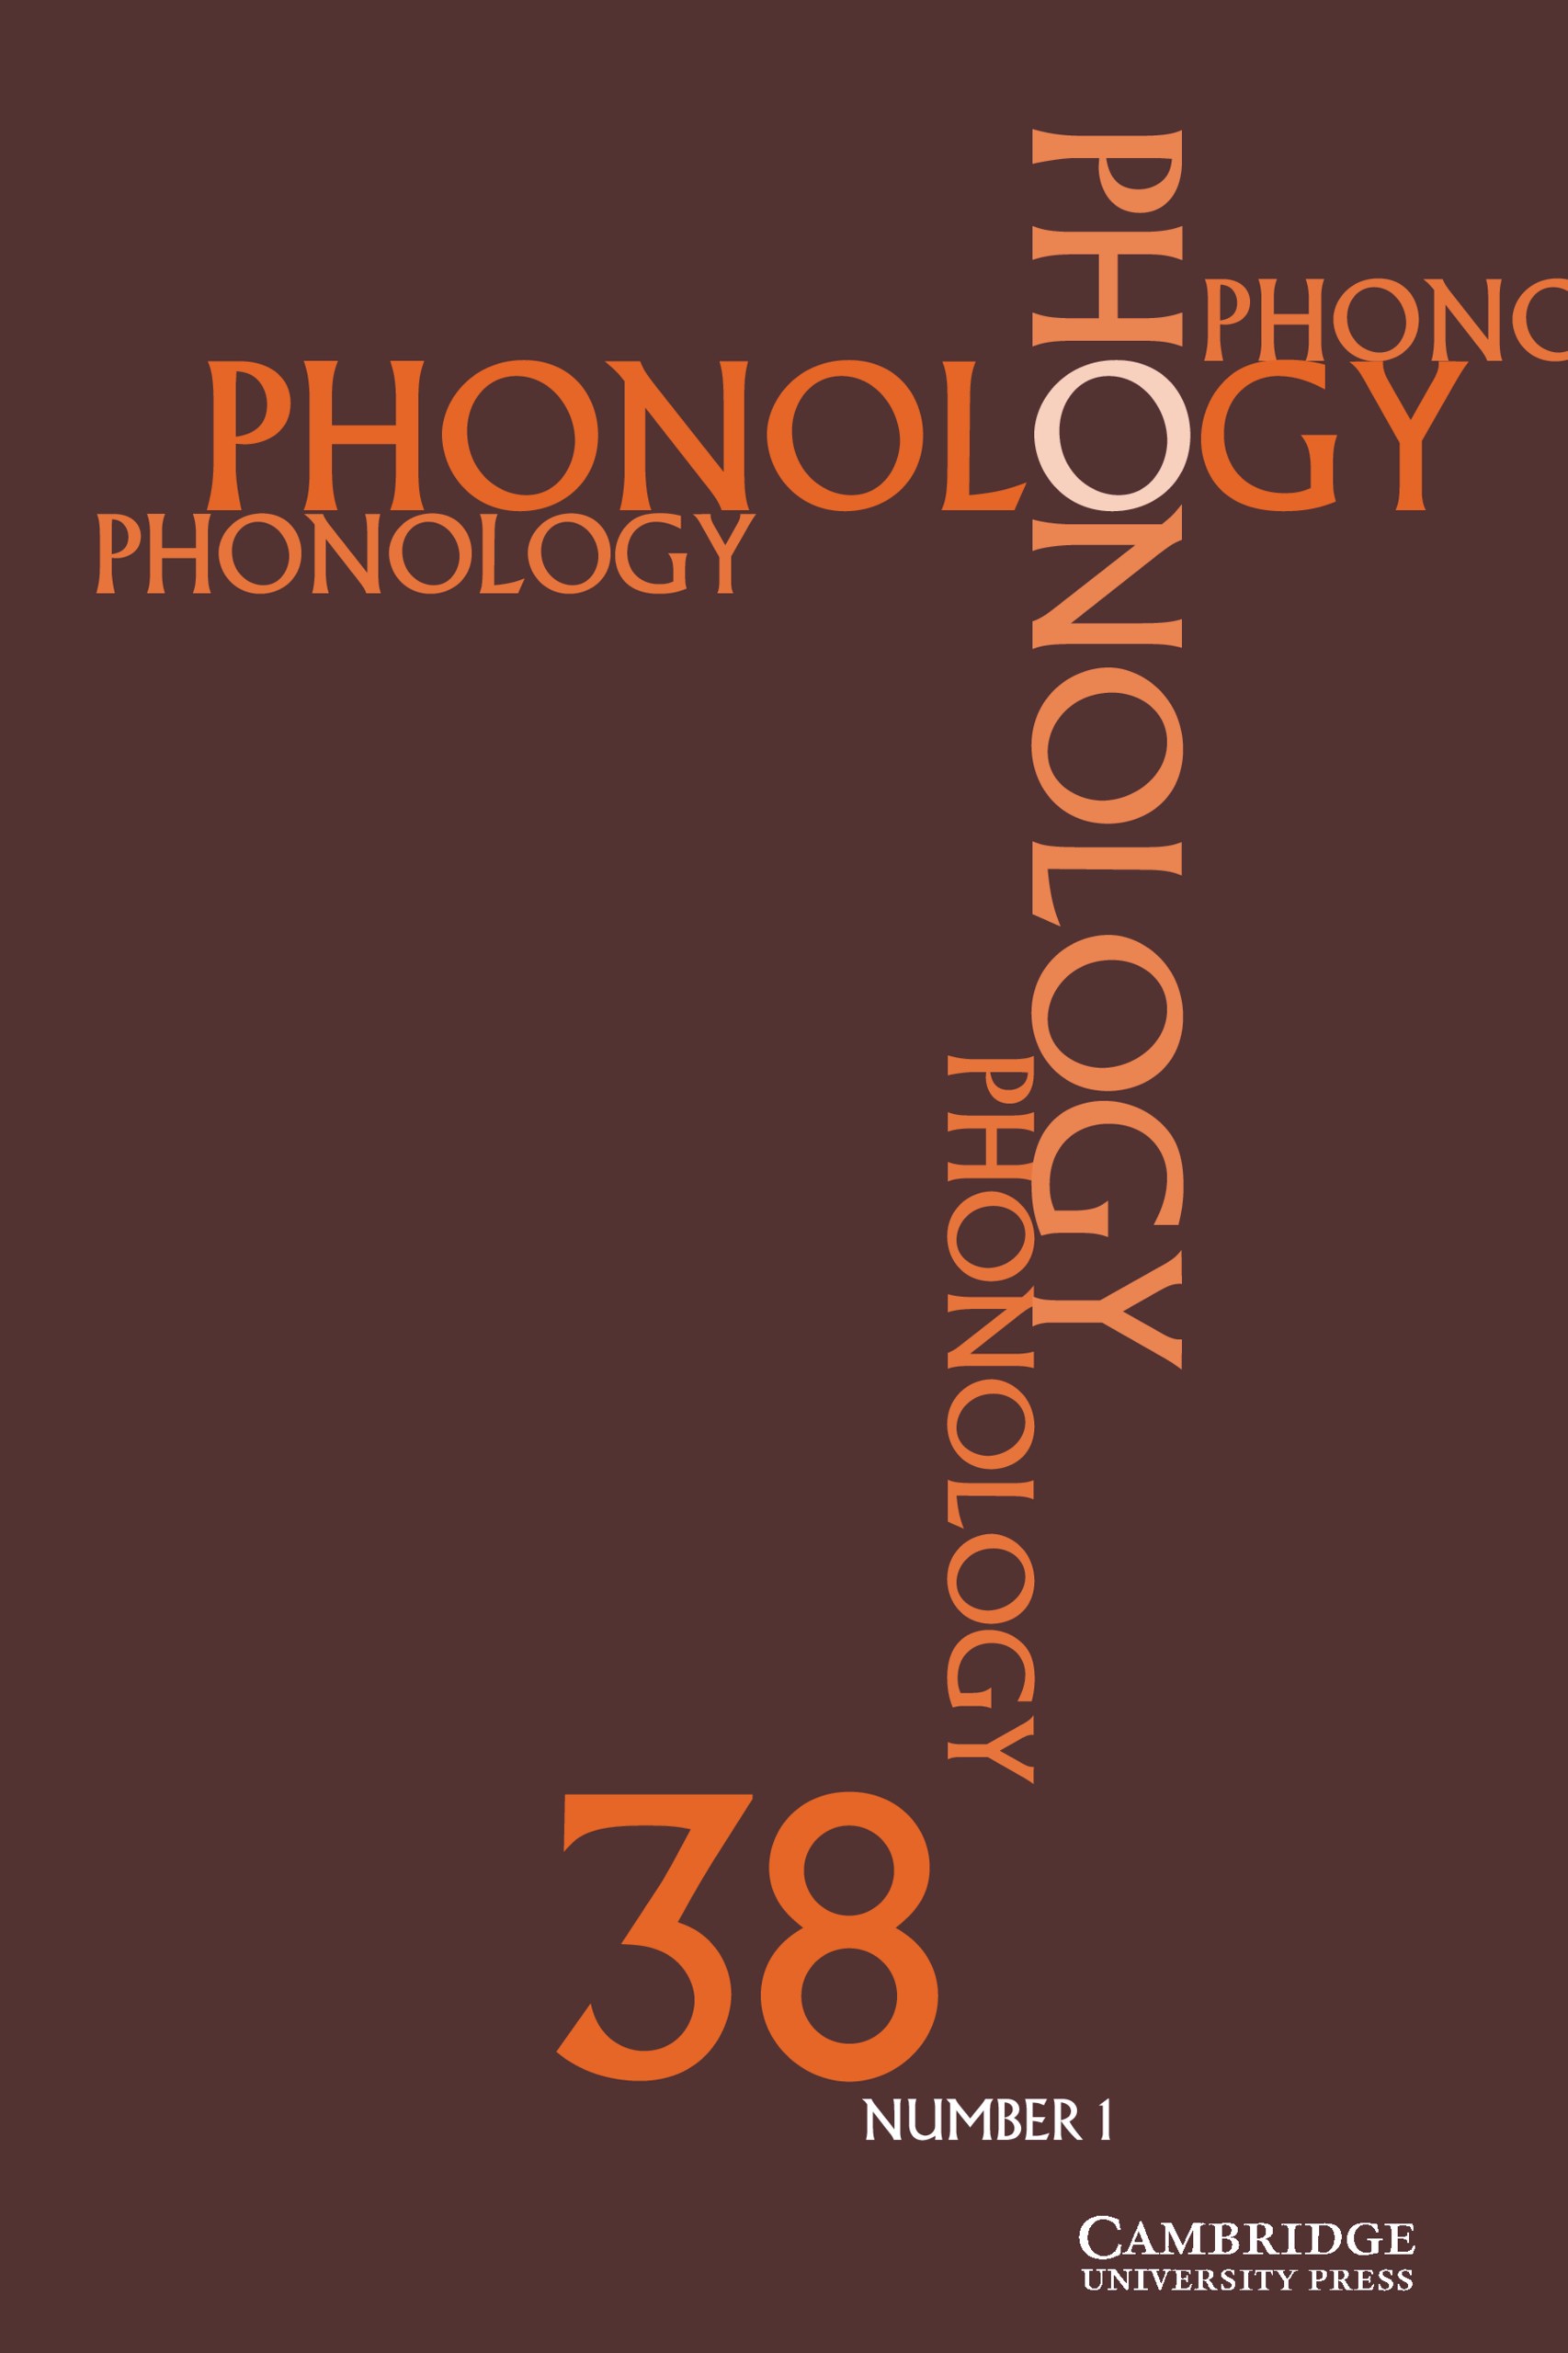 cover of a recent issue of Phonology